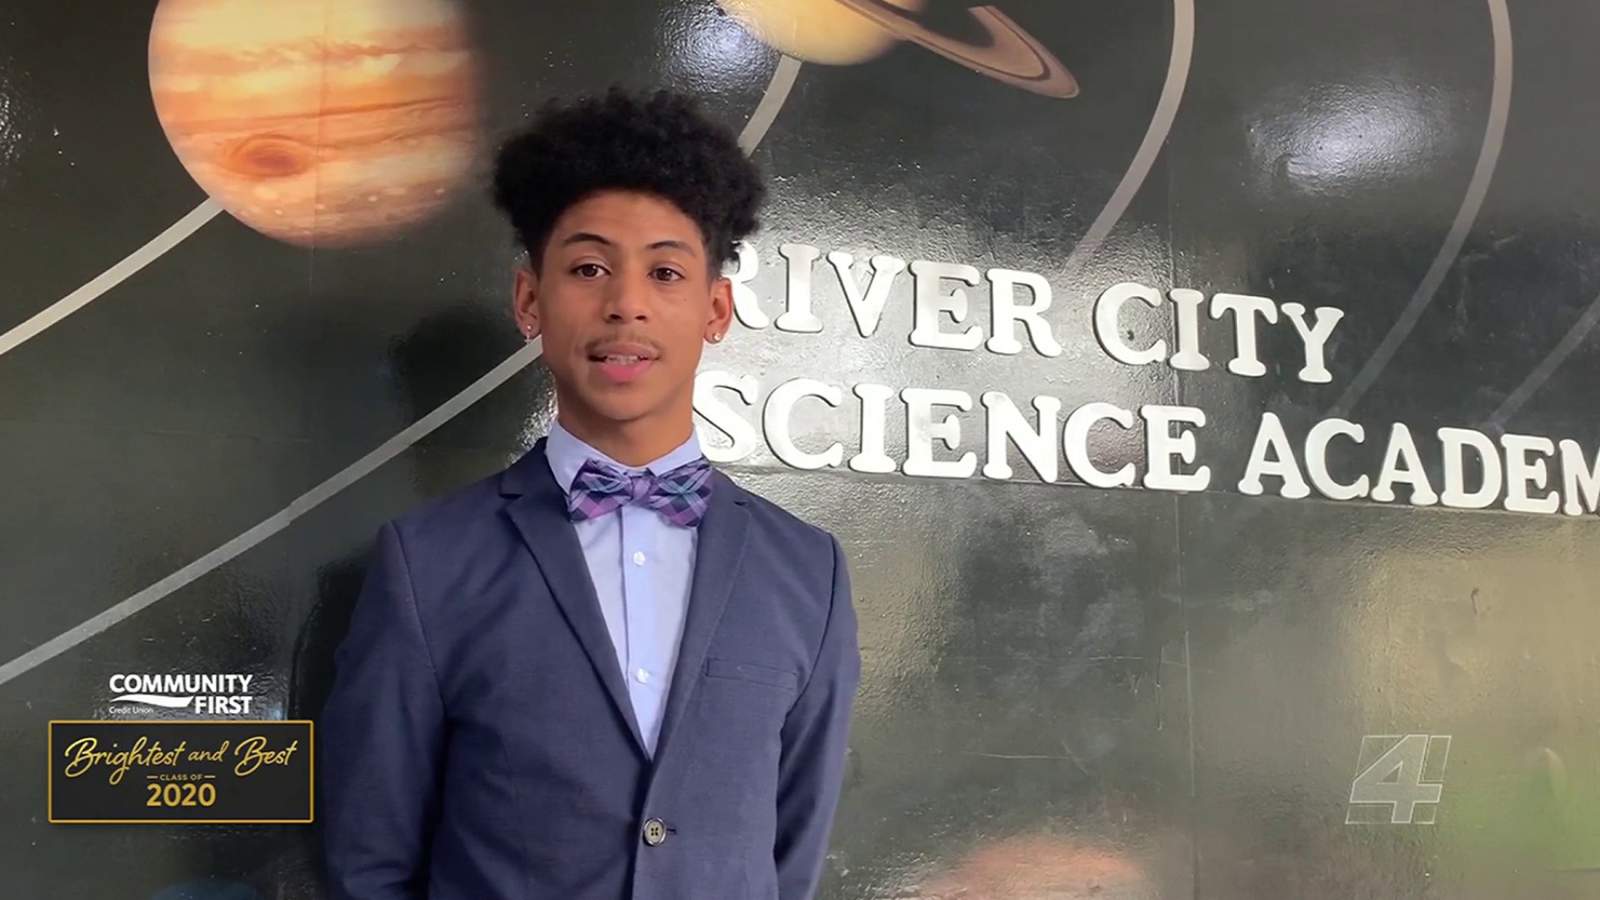 Brightest and Best: River City Science Academy